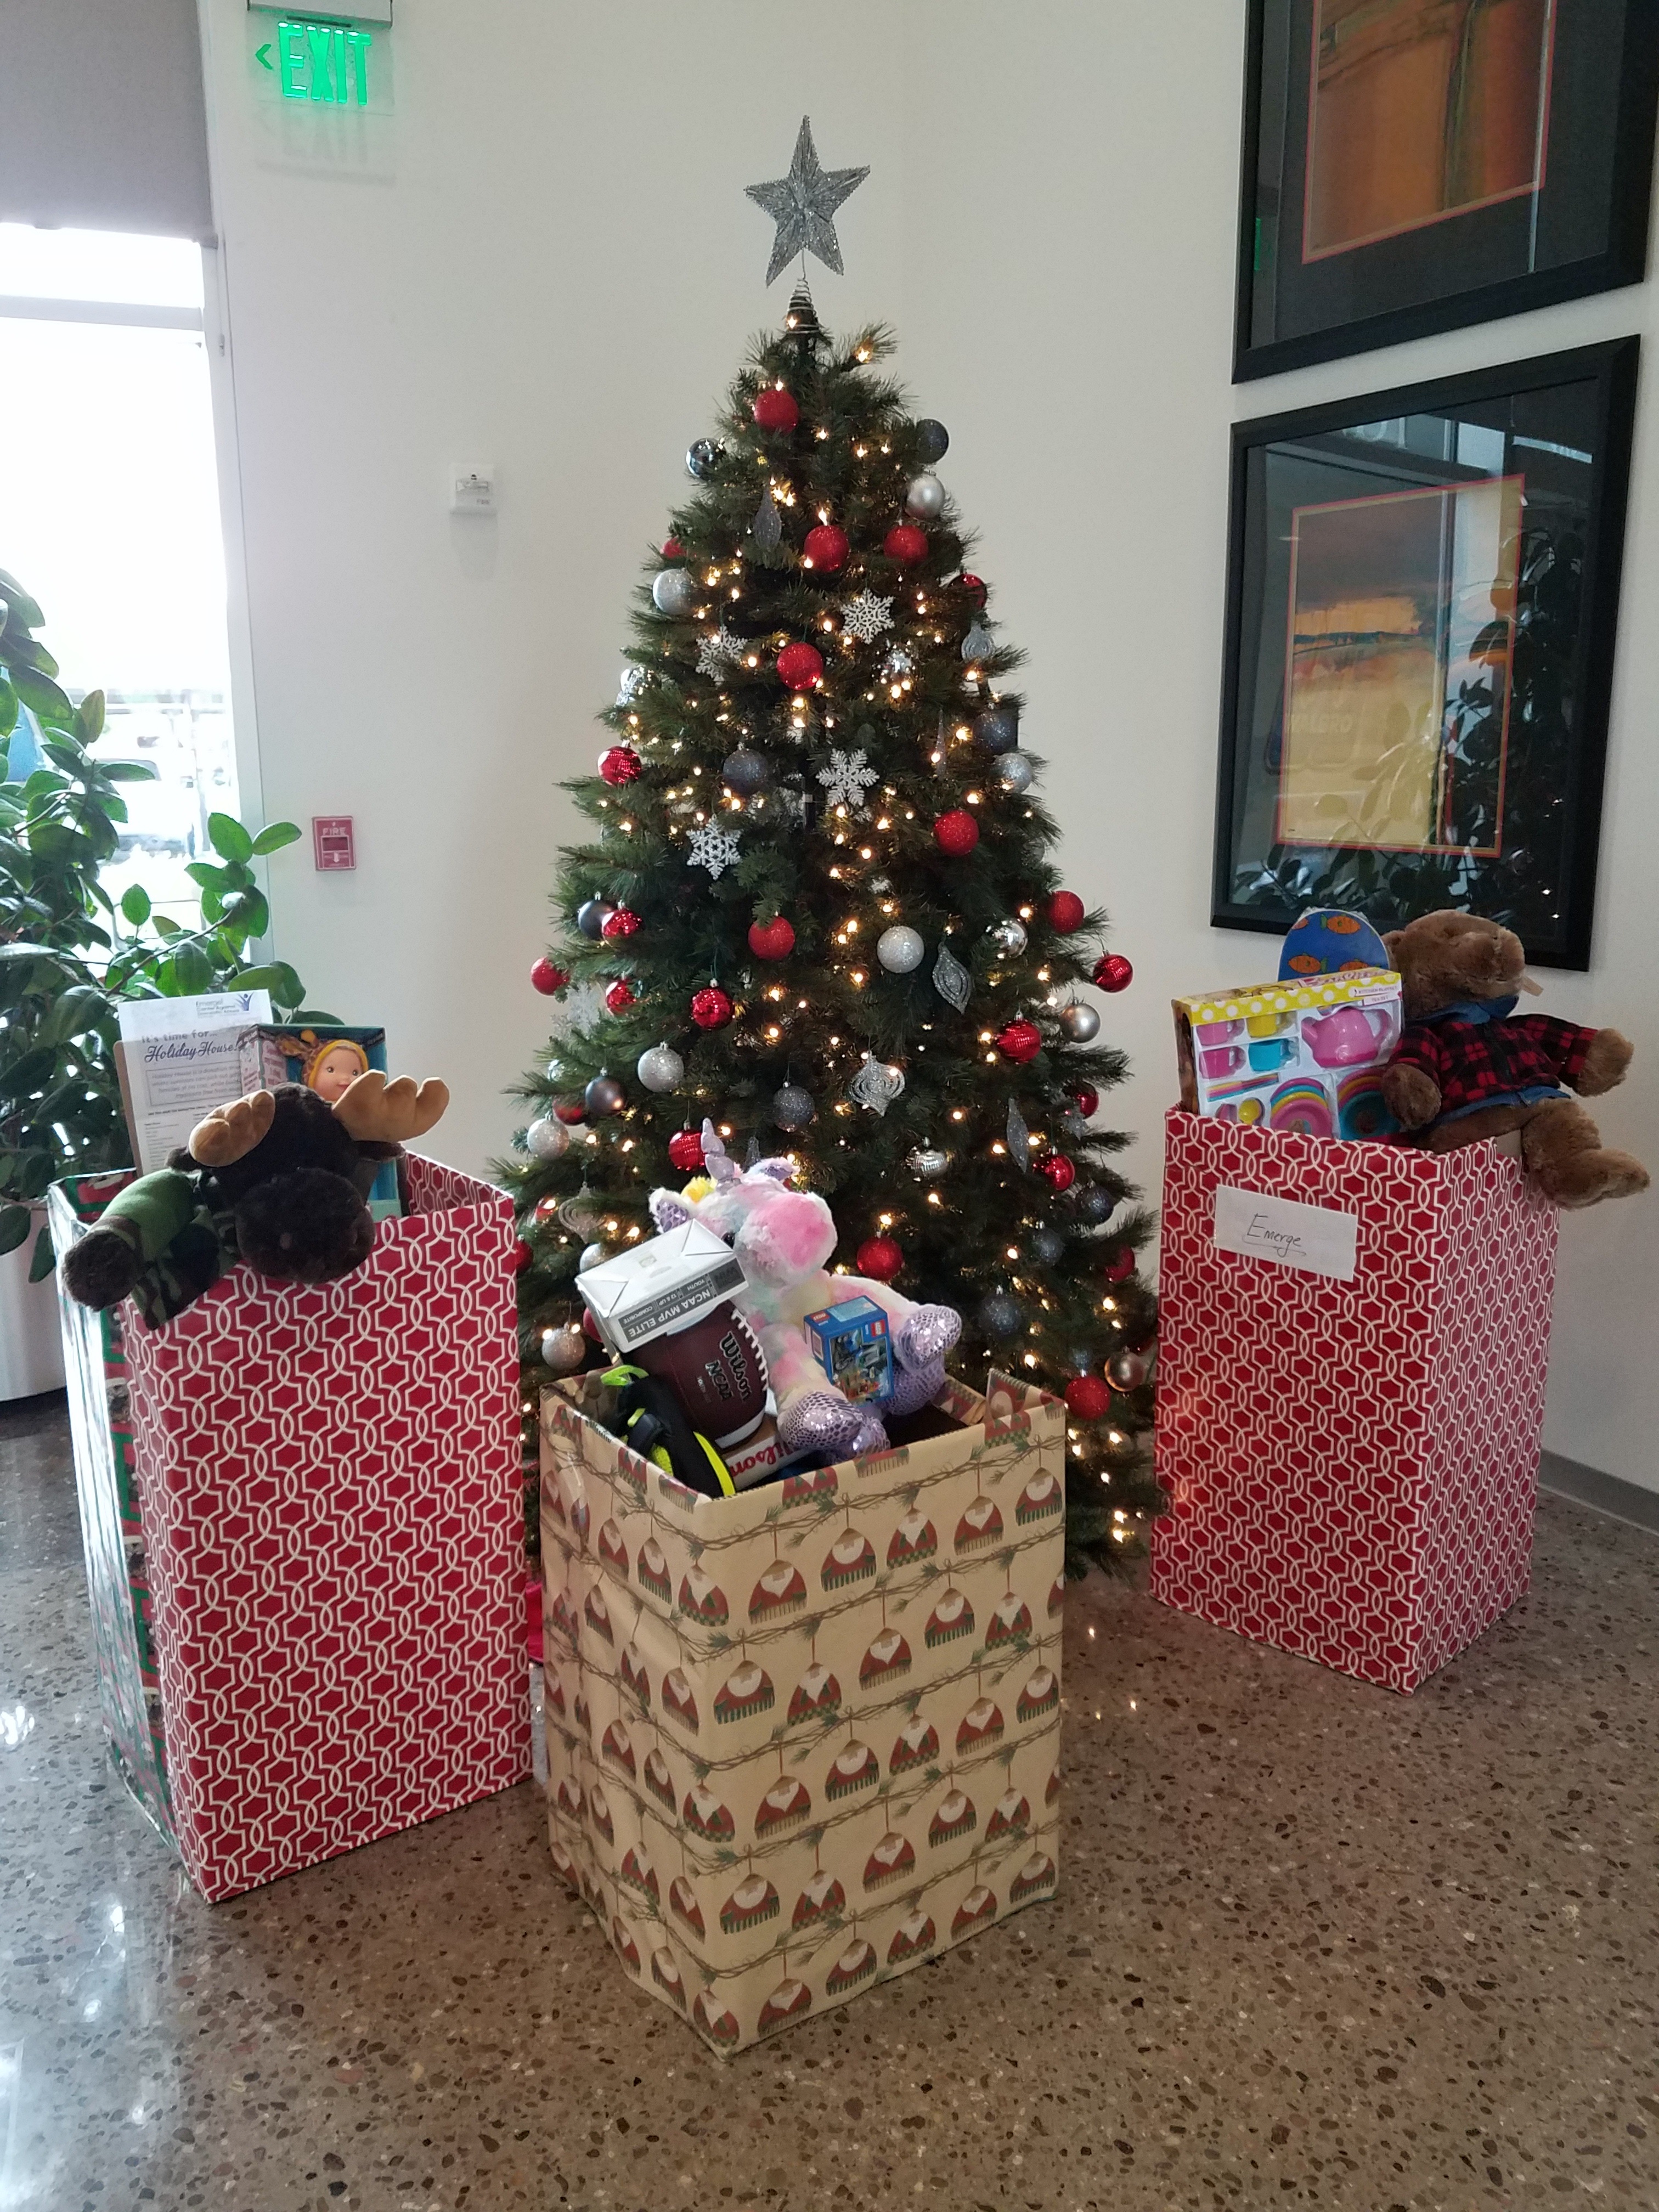 Sundt employee-owners in Tucson gathered toys and gifts for Emerge! Center Against Domestic Abuse and participated in a blood drive with the American Red Cross.